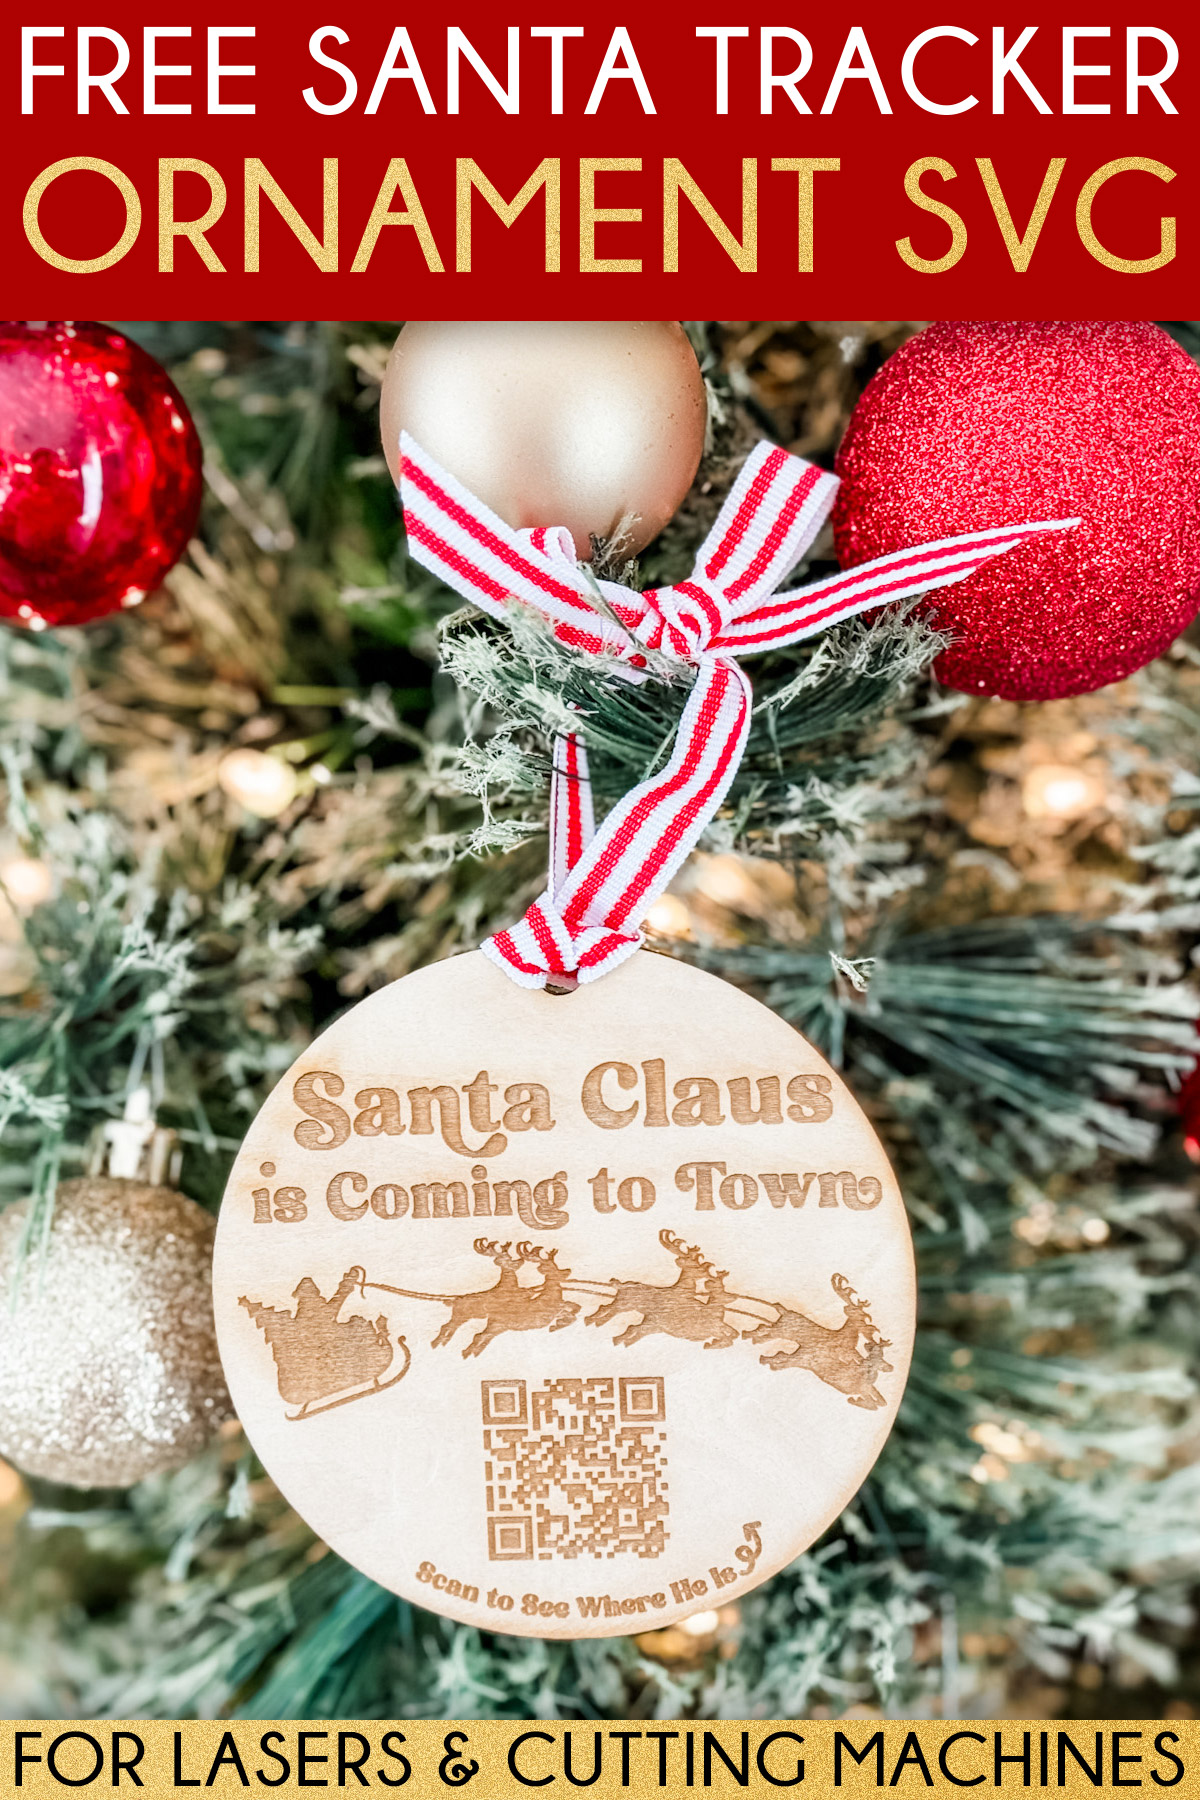 At the top it says free Santa Tracker Ornament SVG. At the bottom it says for lasers & cutting machines. Below is the wooden ornament you can learn to make. It says, "Santa Claus is coming to Town" and has a picture of Santa flying with his reindeer and a QR code to scan and visit the Santa tracker app.